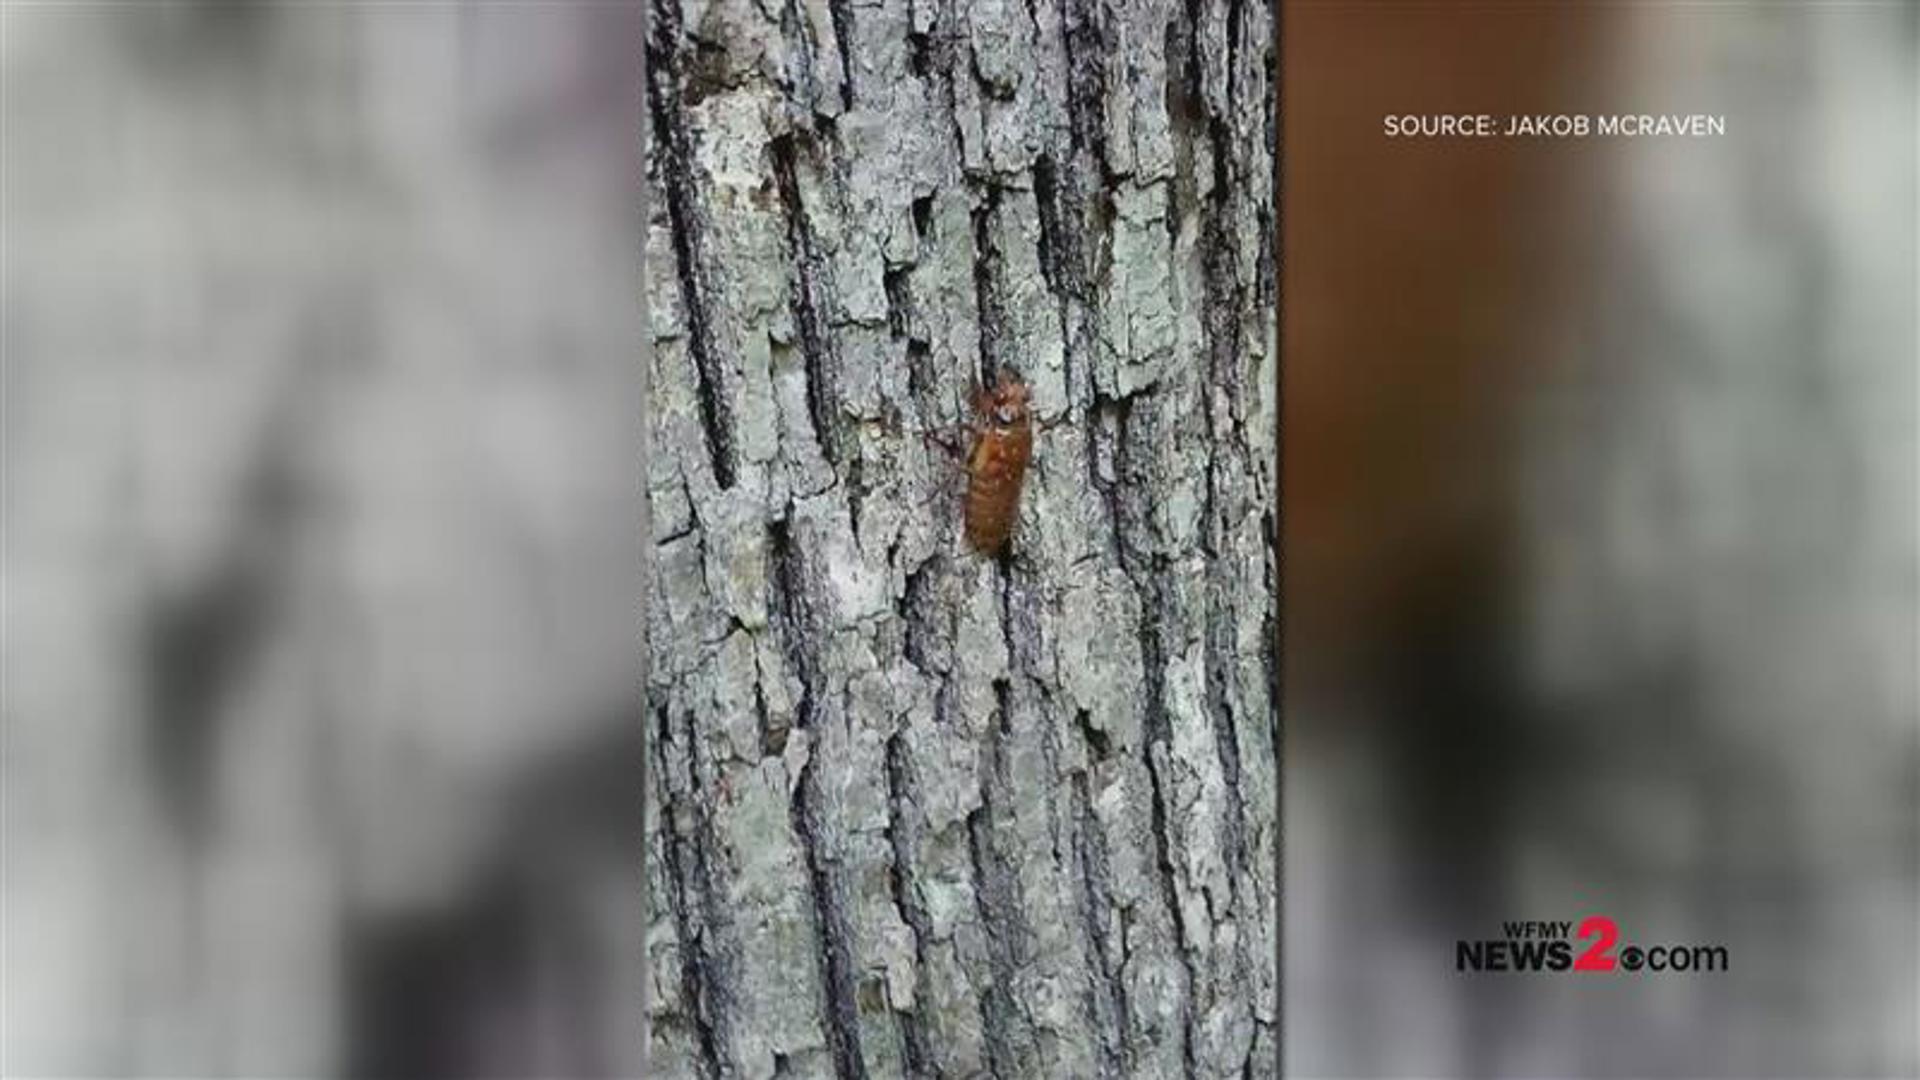 Watch as red-eyed cicadas emerge from the ground and climb up a tree in Mebane, North Carolina.